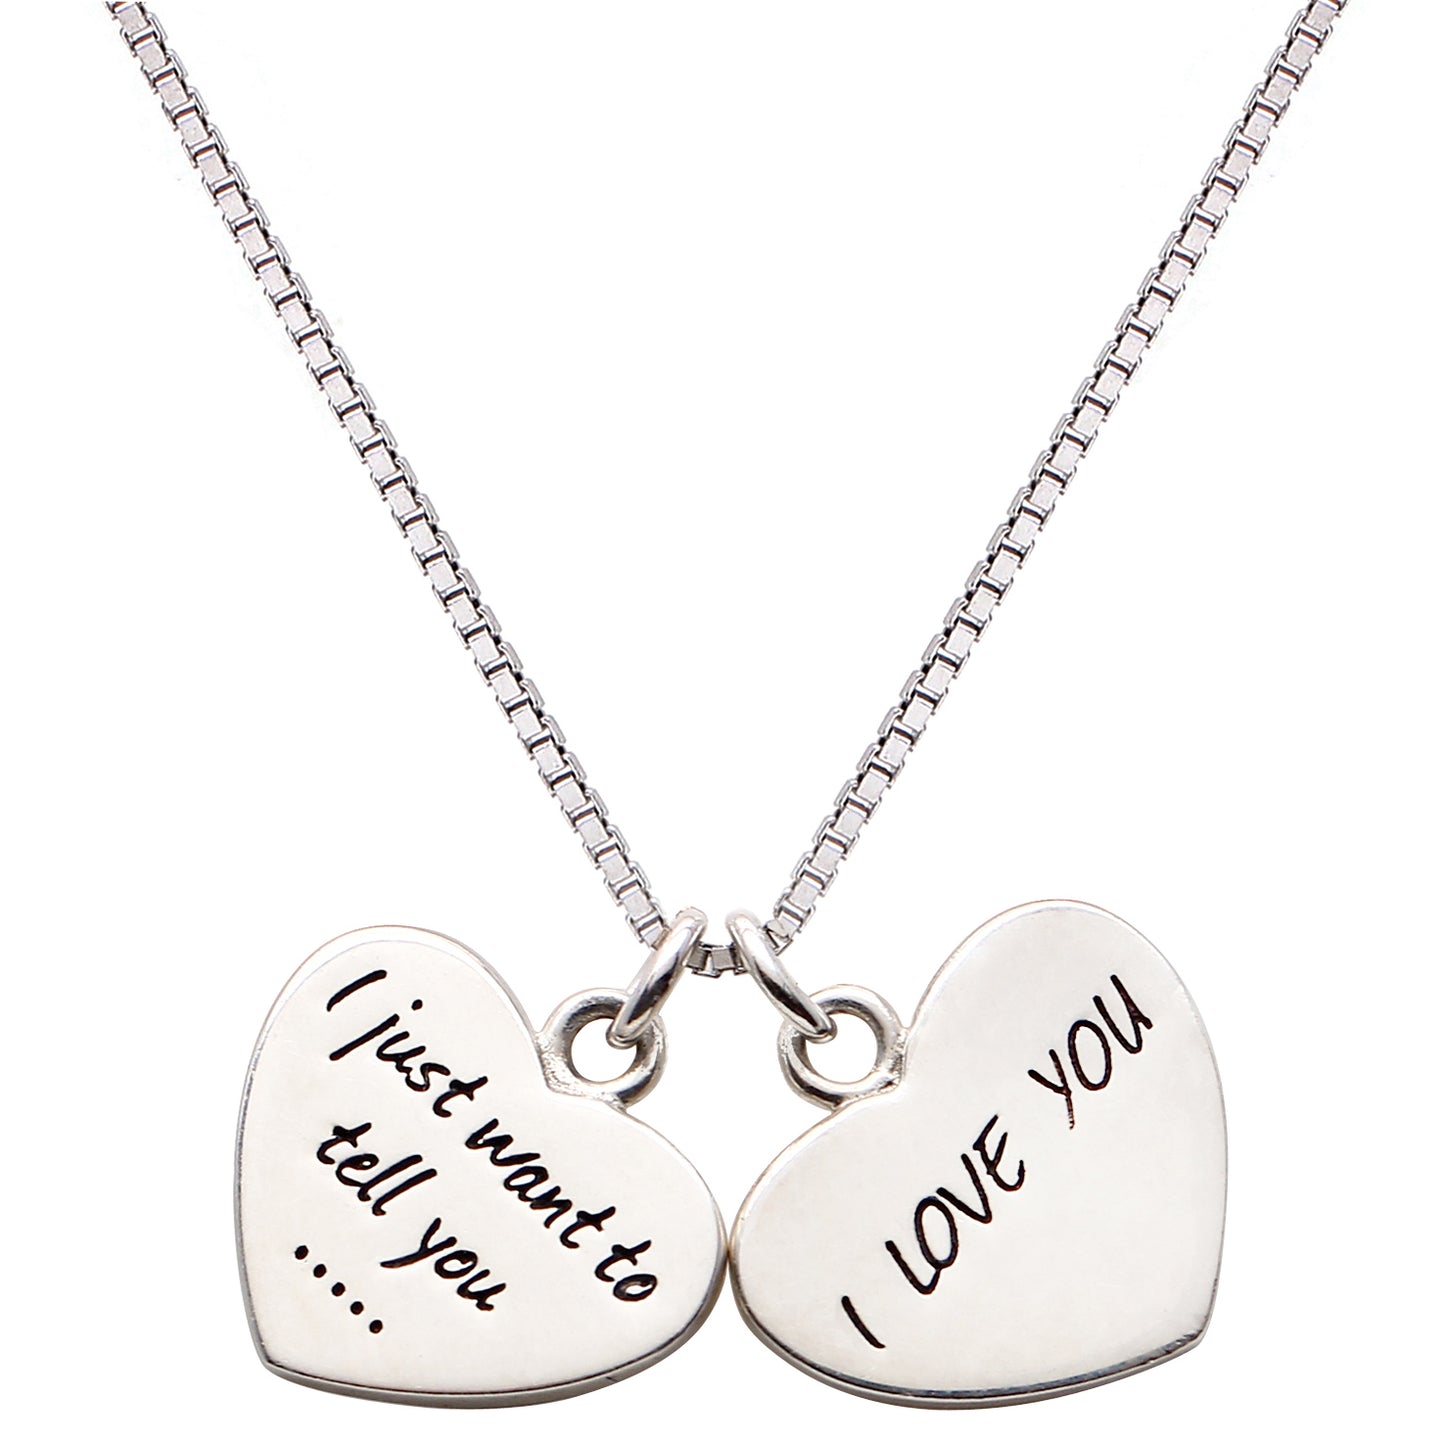 Alov Sterling Silver I just want to tell you... I love you Double Hearts Necklace, 45cm